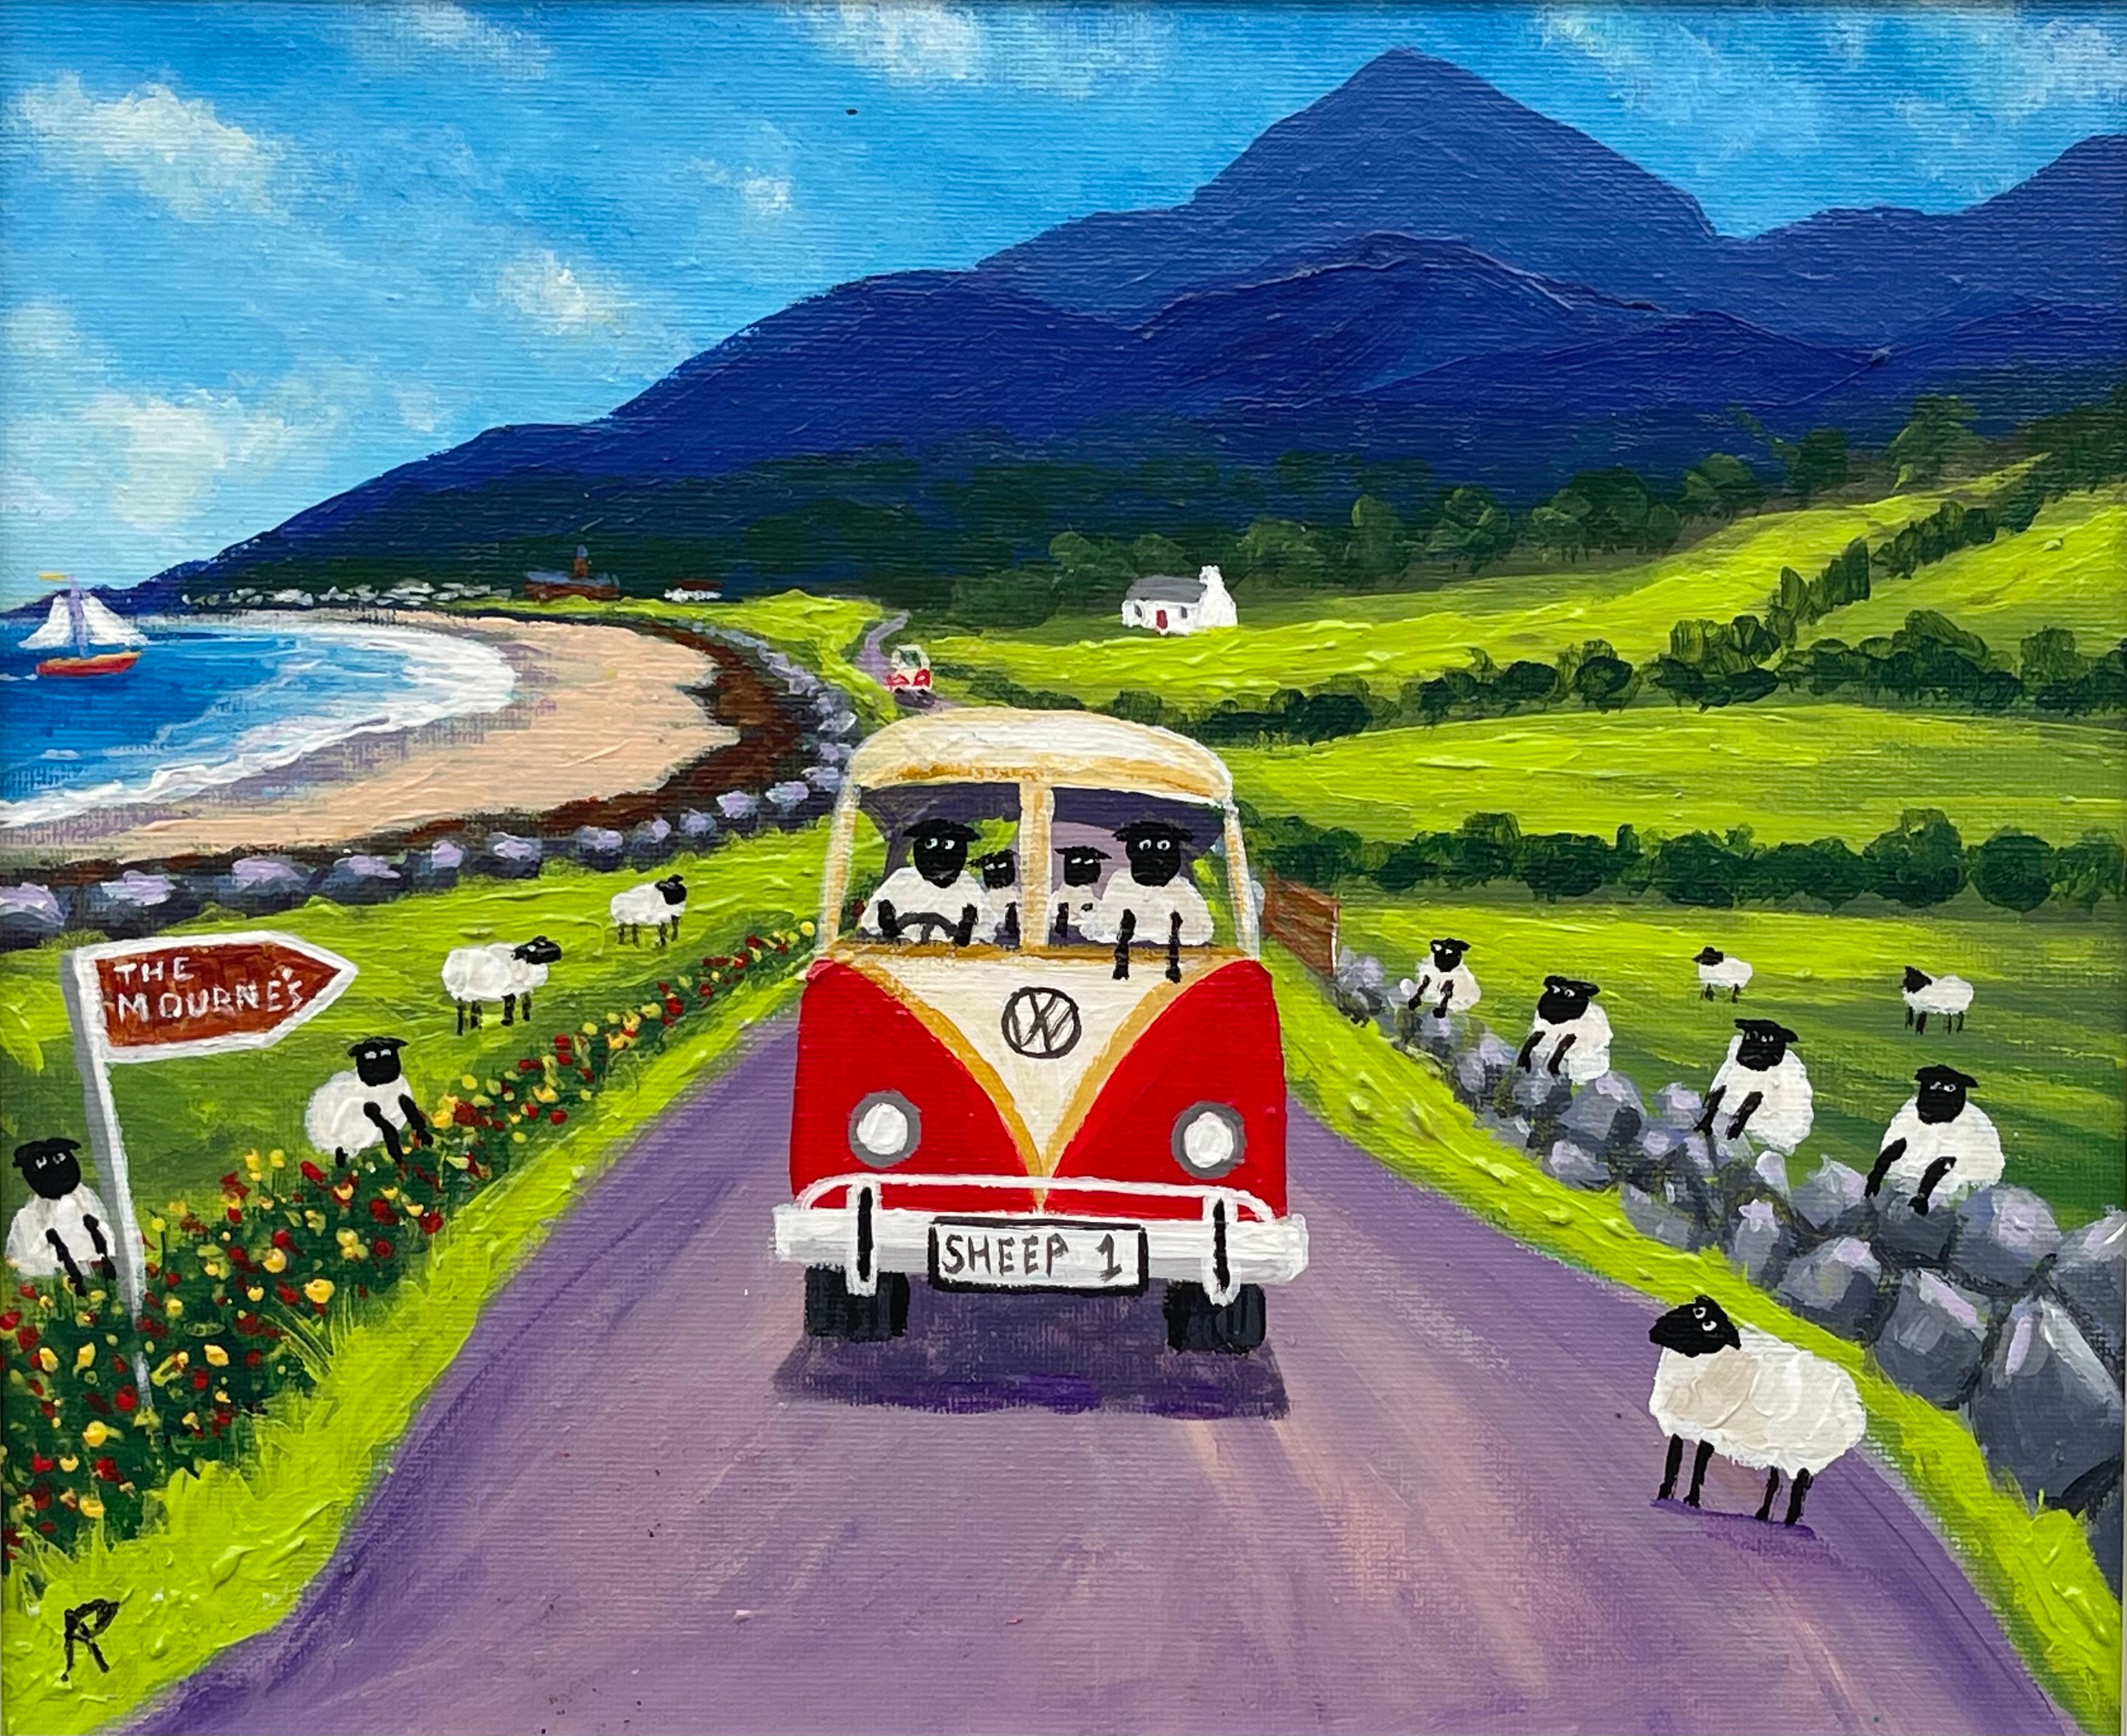 Sheep in a VW Split Screen Camper Van with Beach Mountain Scene in Ireland - Contemporary Painting by Andy Pat